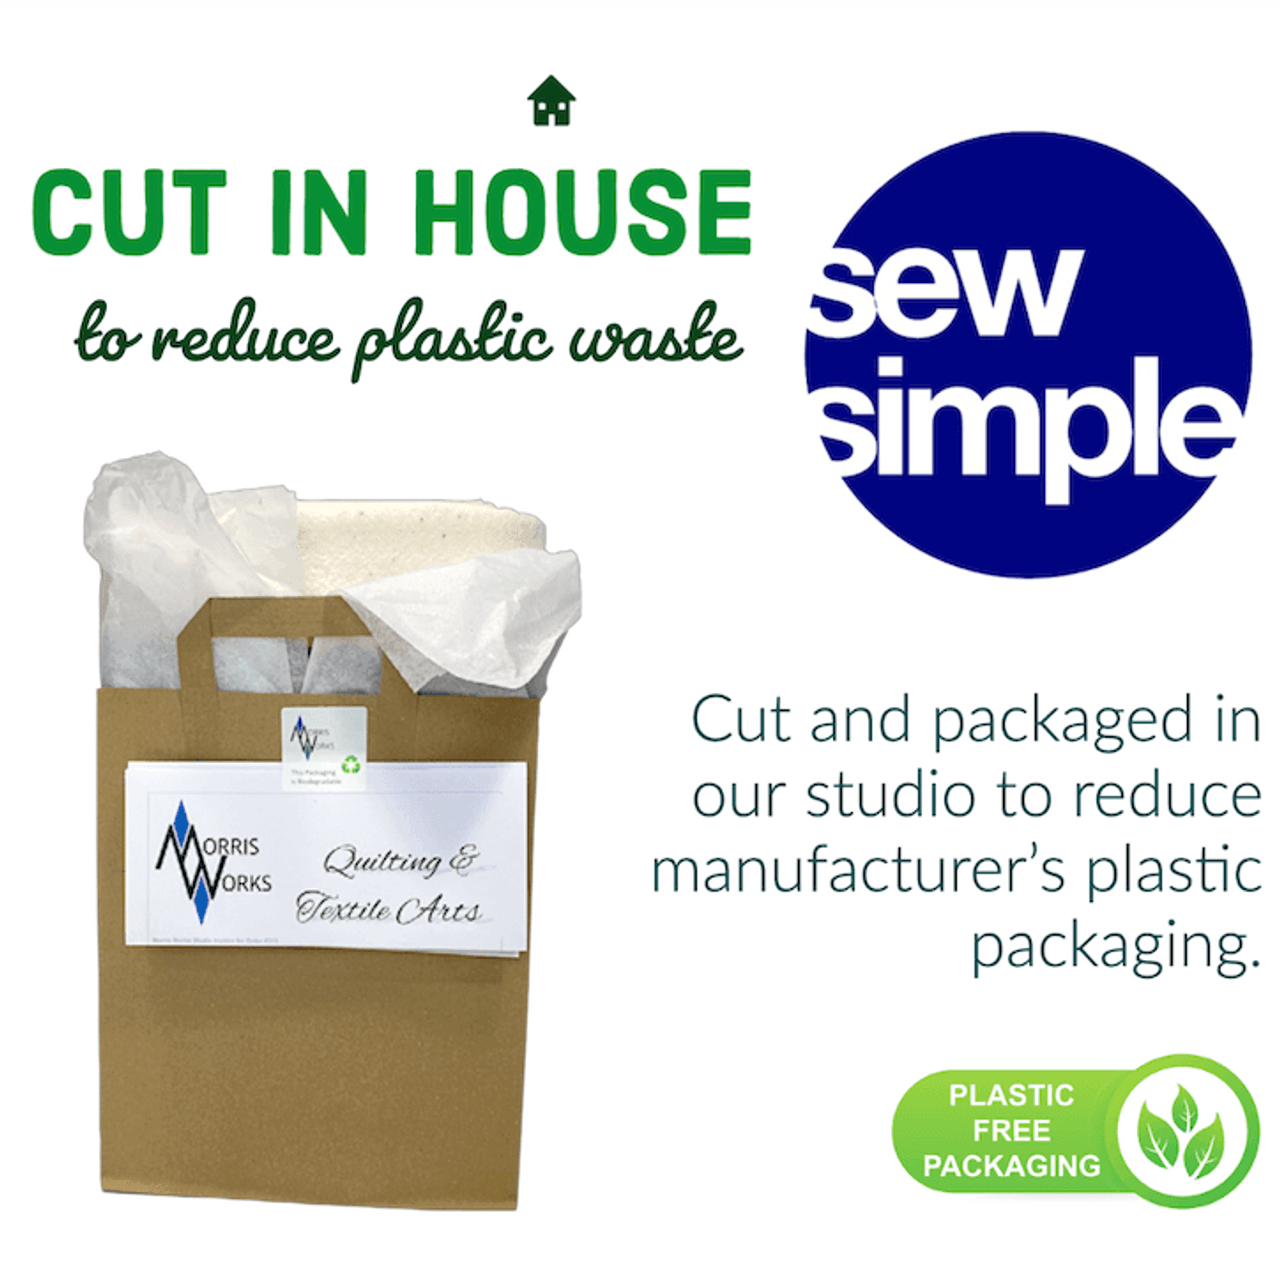 We cut all our Sew Simple Wadding in house and use plastic free packaging to reduce manufacturer's plastic.